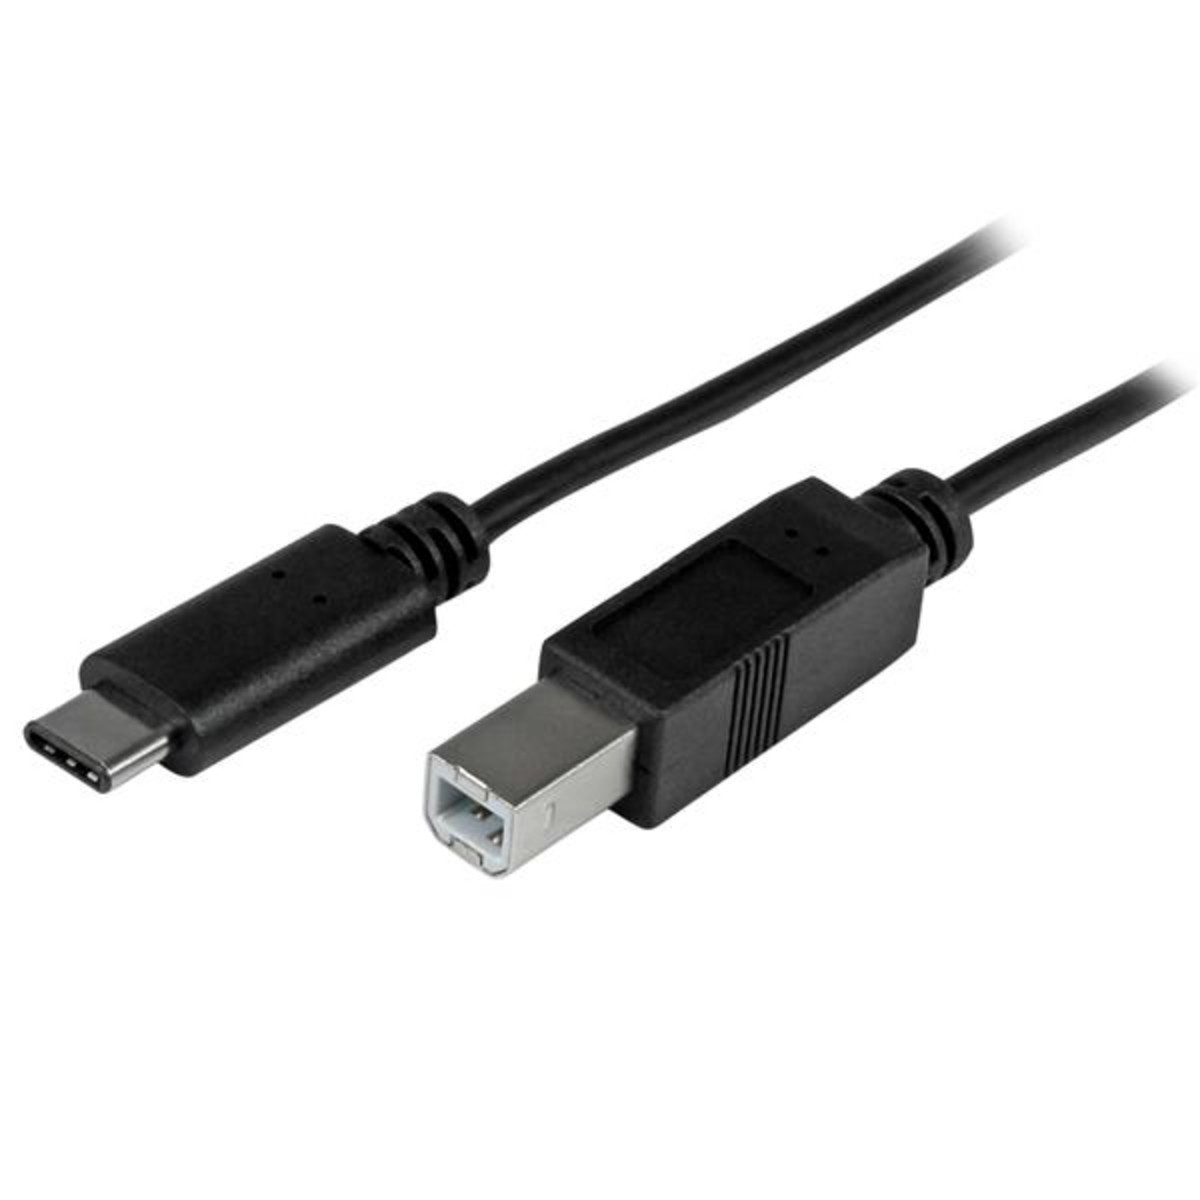 2m 6ft USB C to USB B Cable - USB 2.0